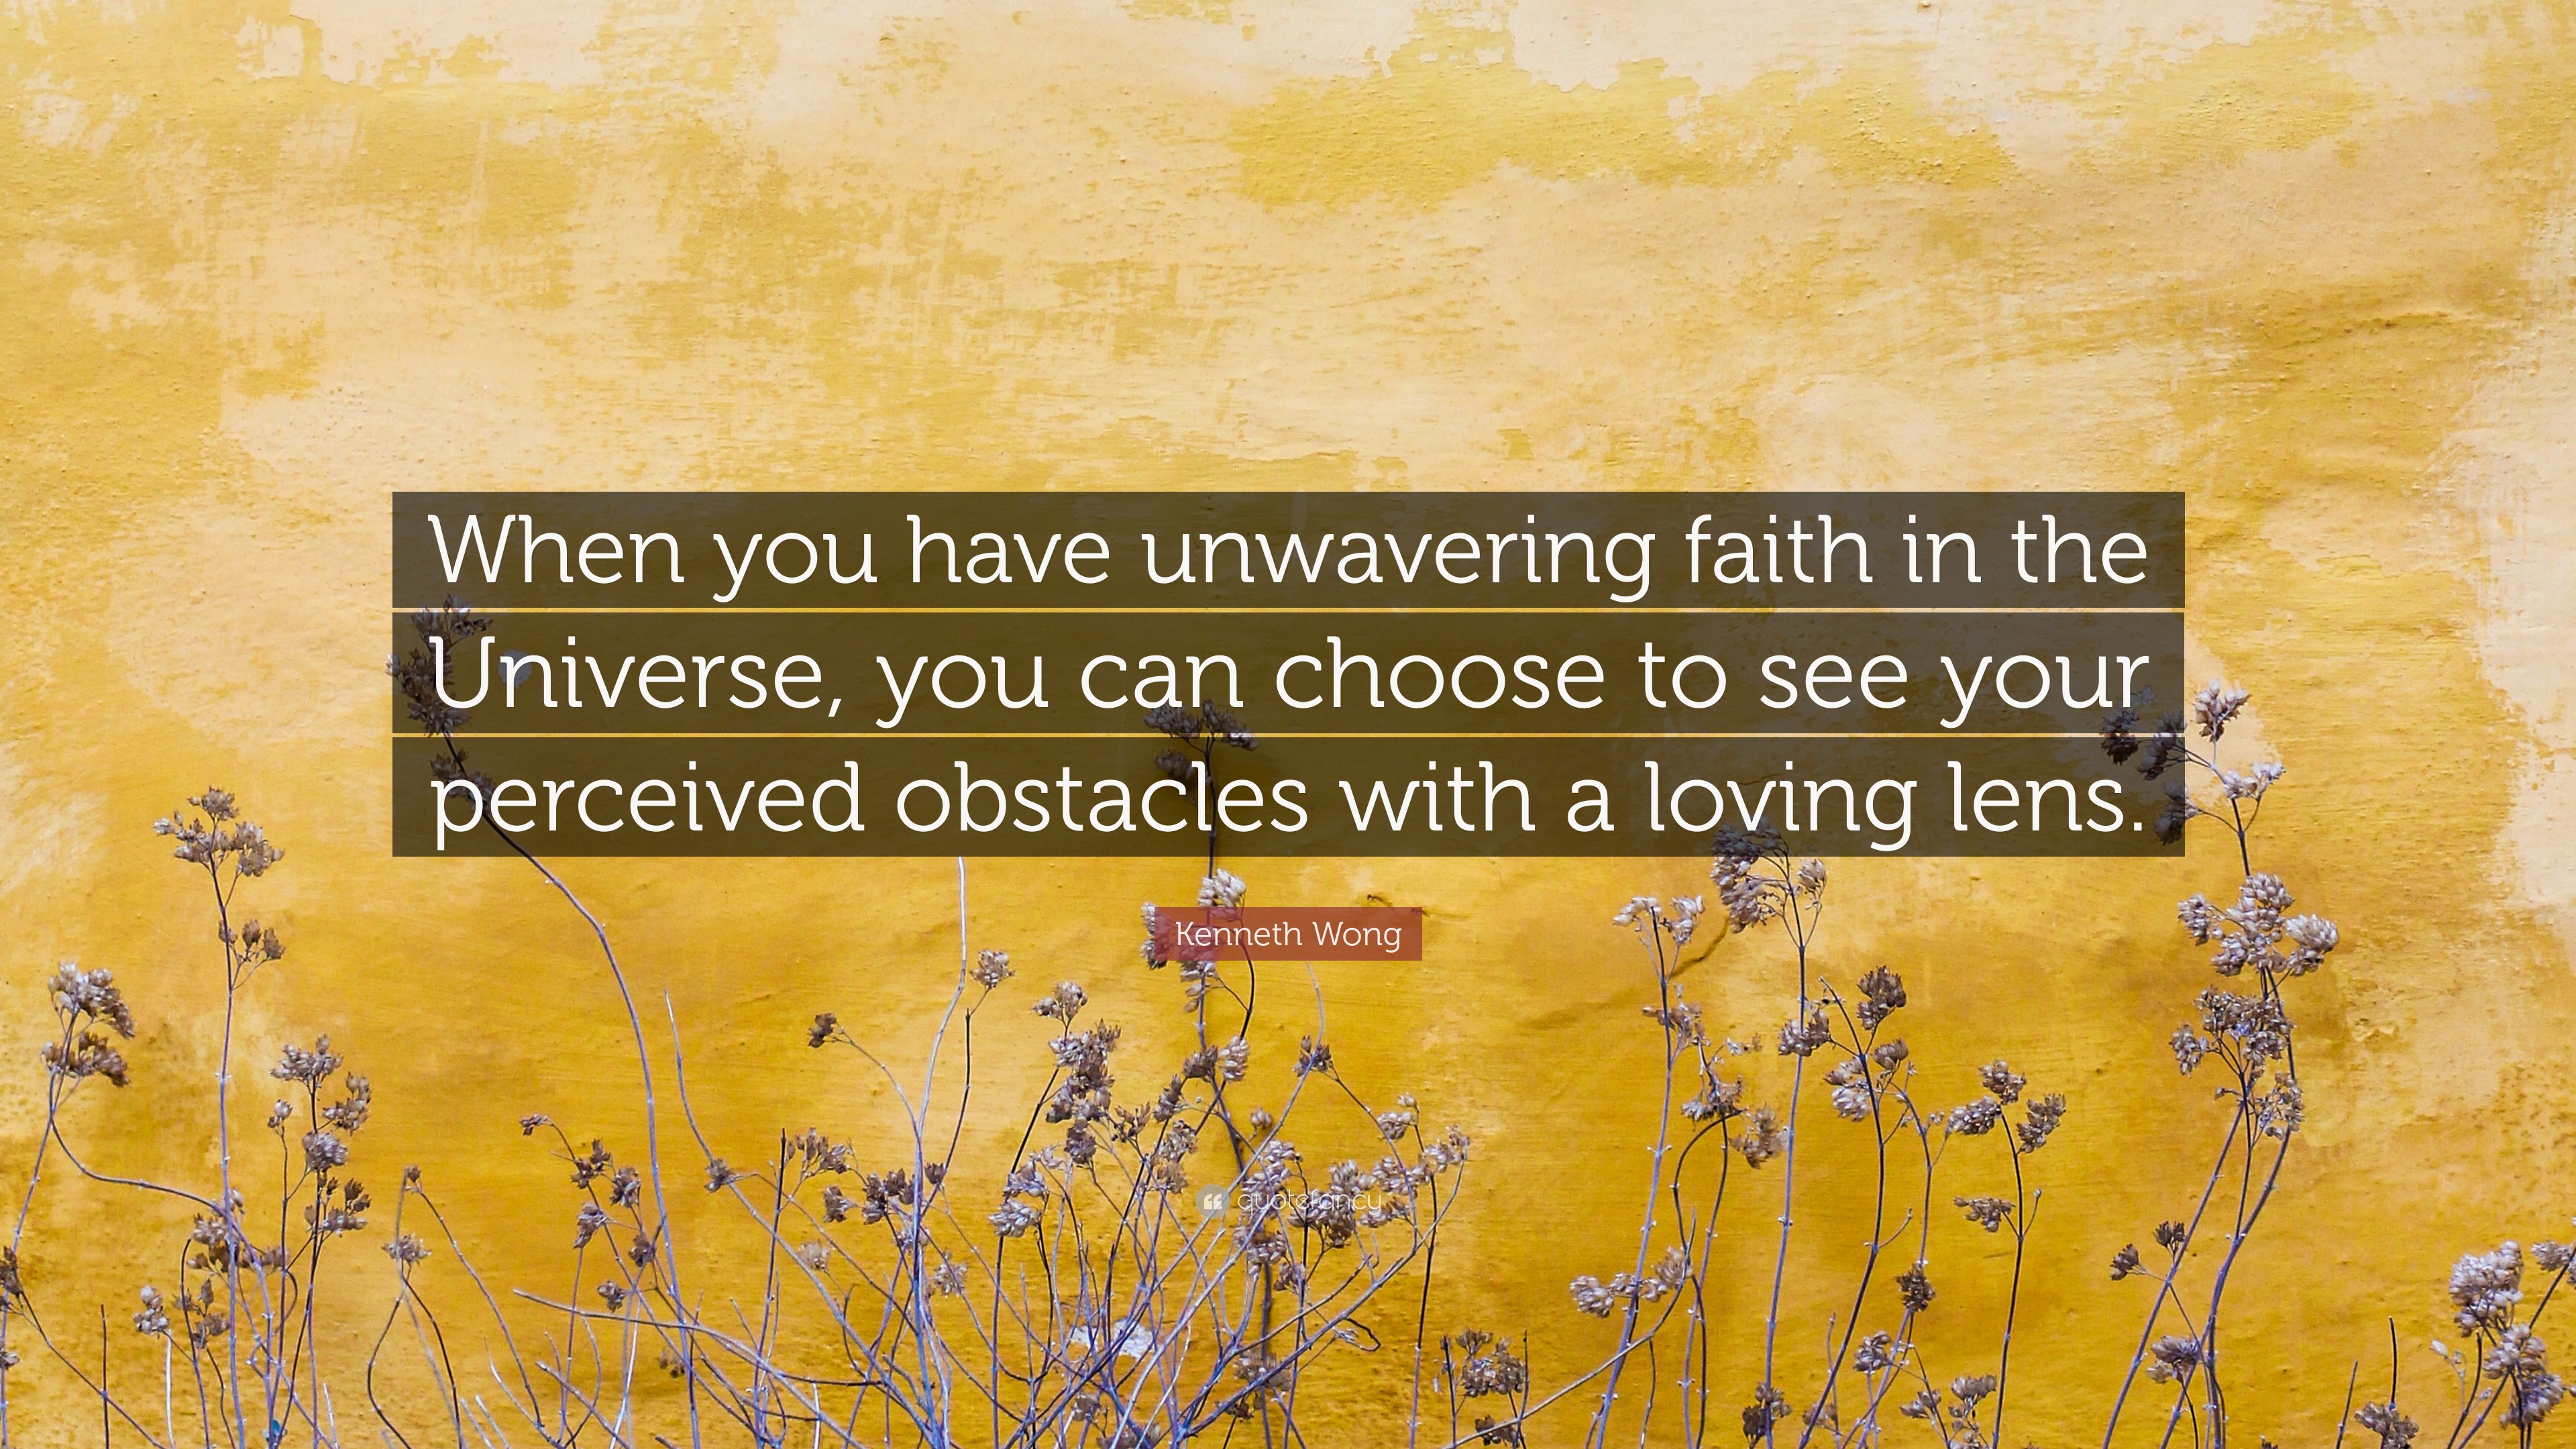 Kenneth Wong Quote: “When you have unwavering faith in the Universe ...